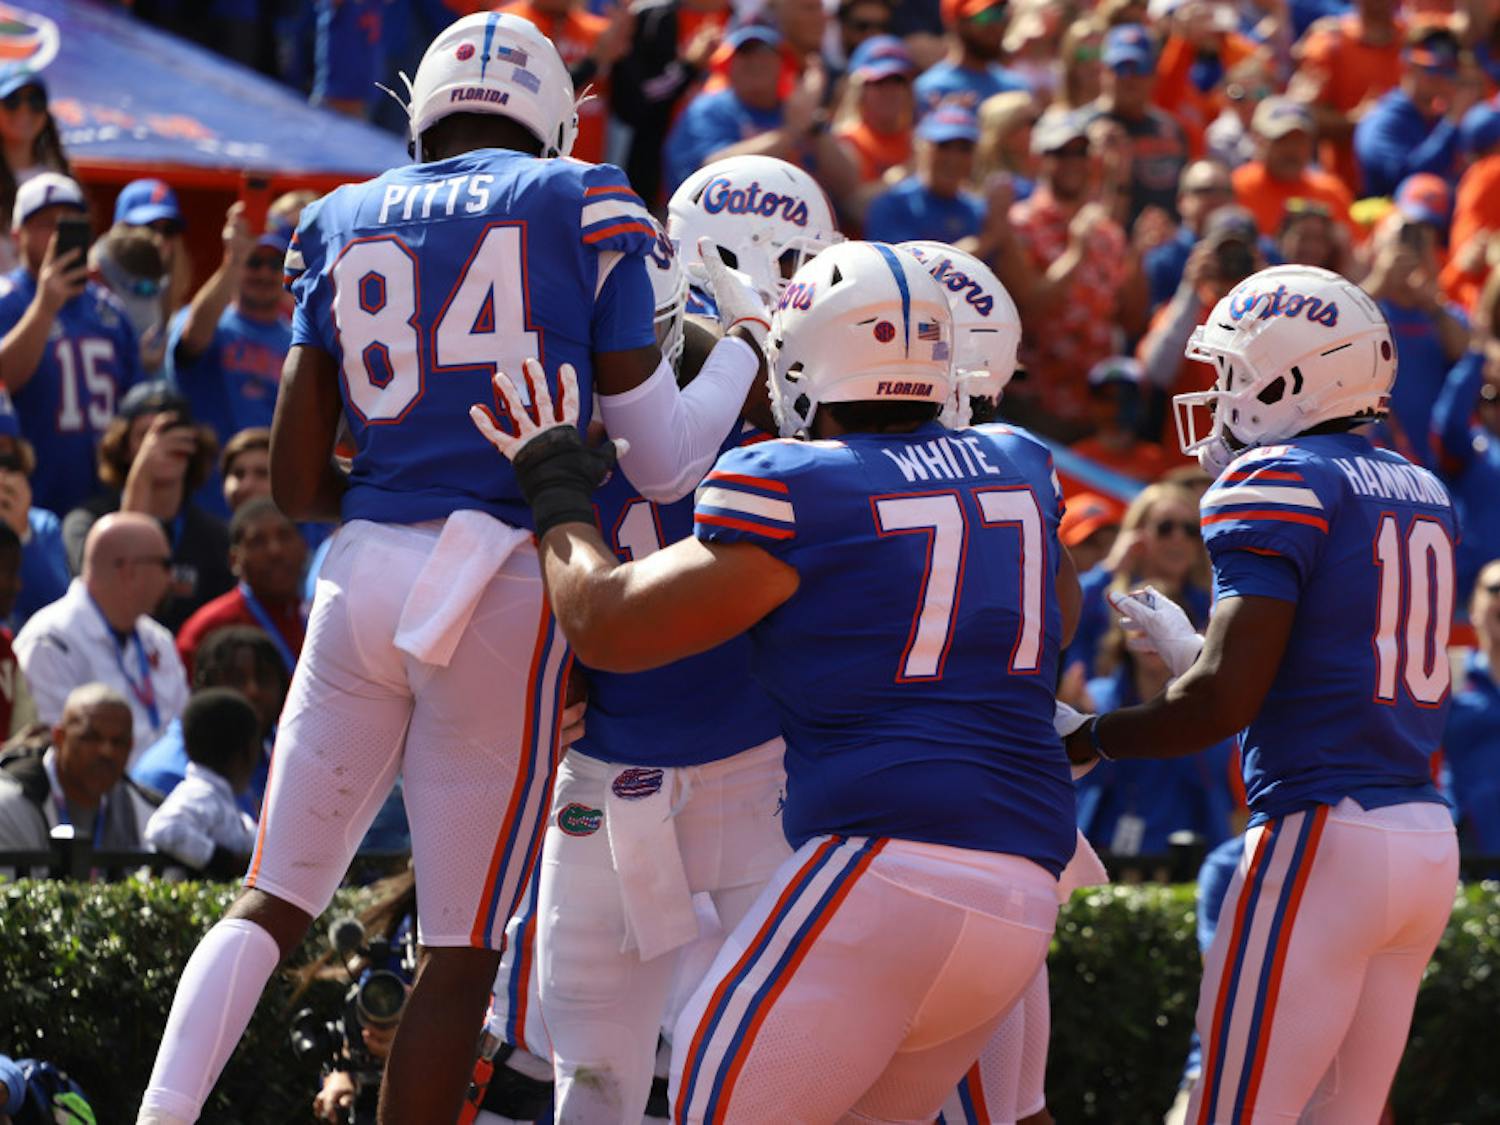 Saturday's win over Vanderbilt was UF's largest against an SEC opponent since 2008.